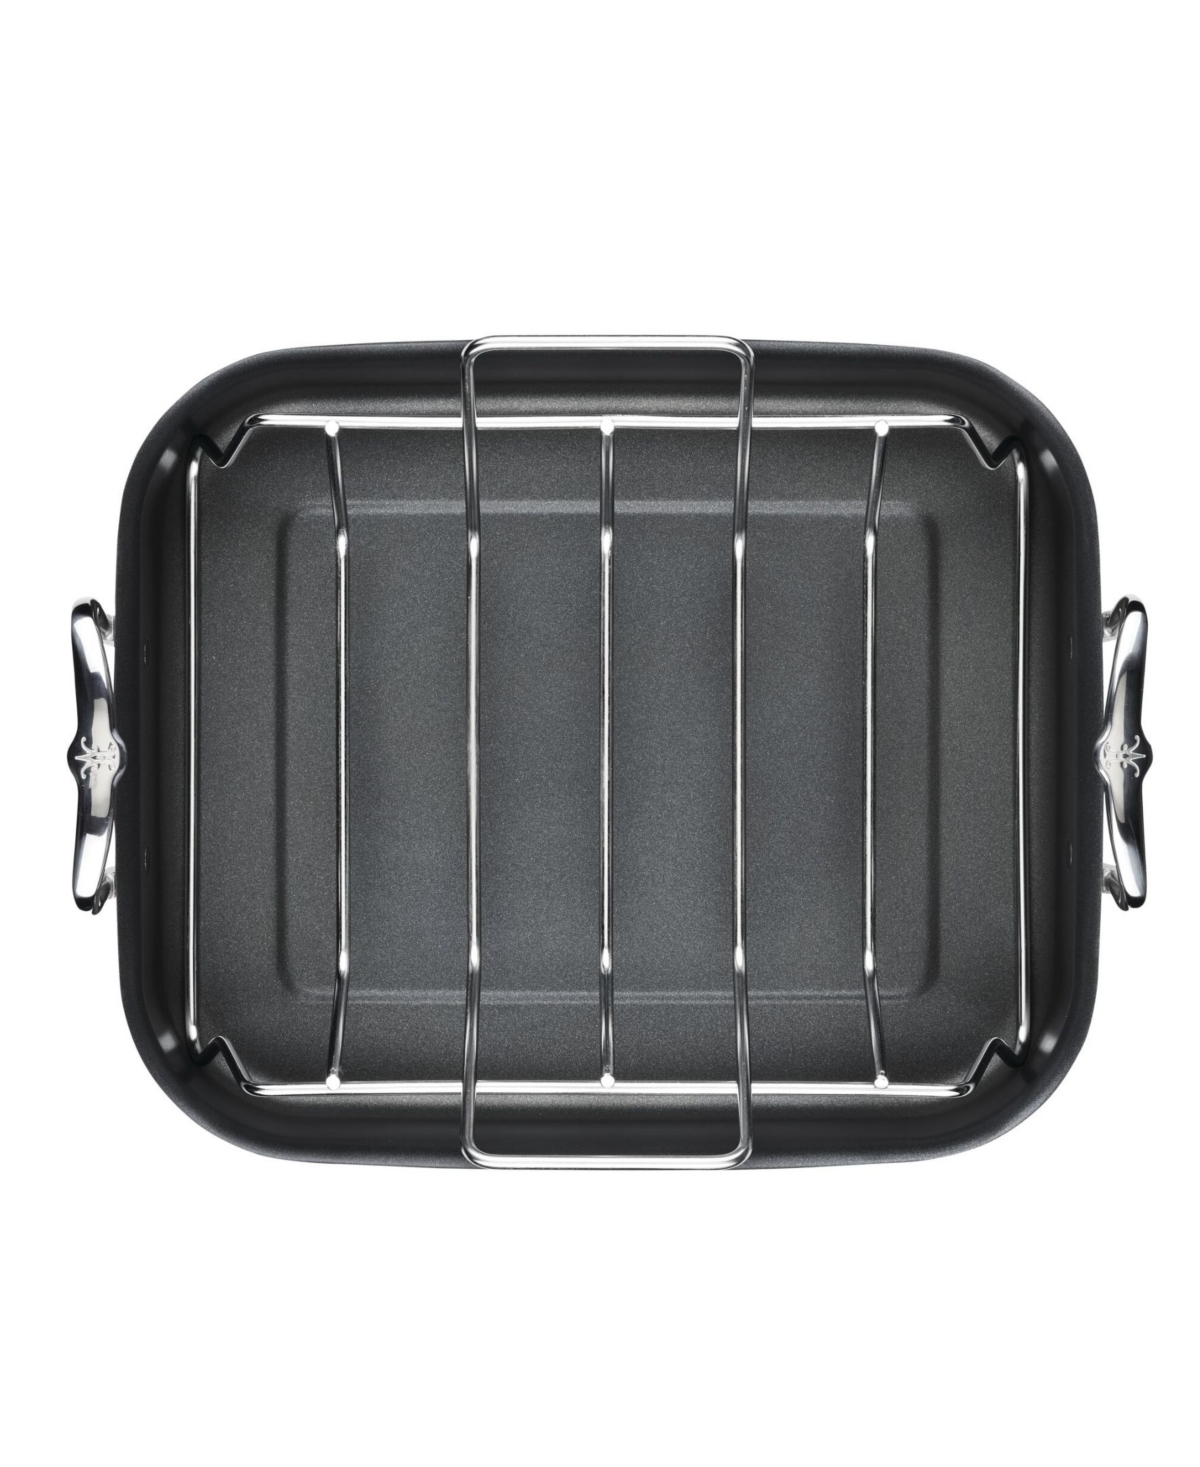 Shop Hestan Provisions Classic Clad Nonstick Small Roaster With Rack In Stainless Steel